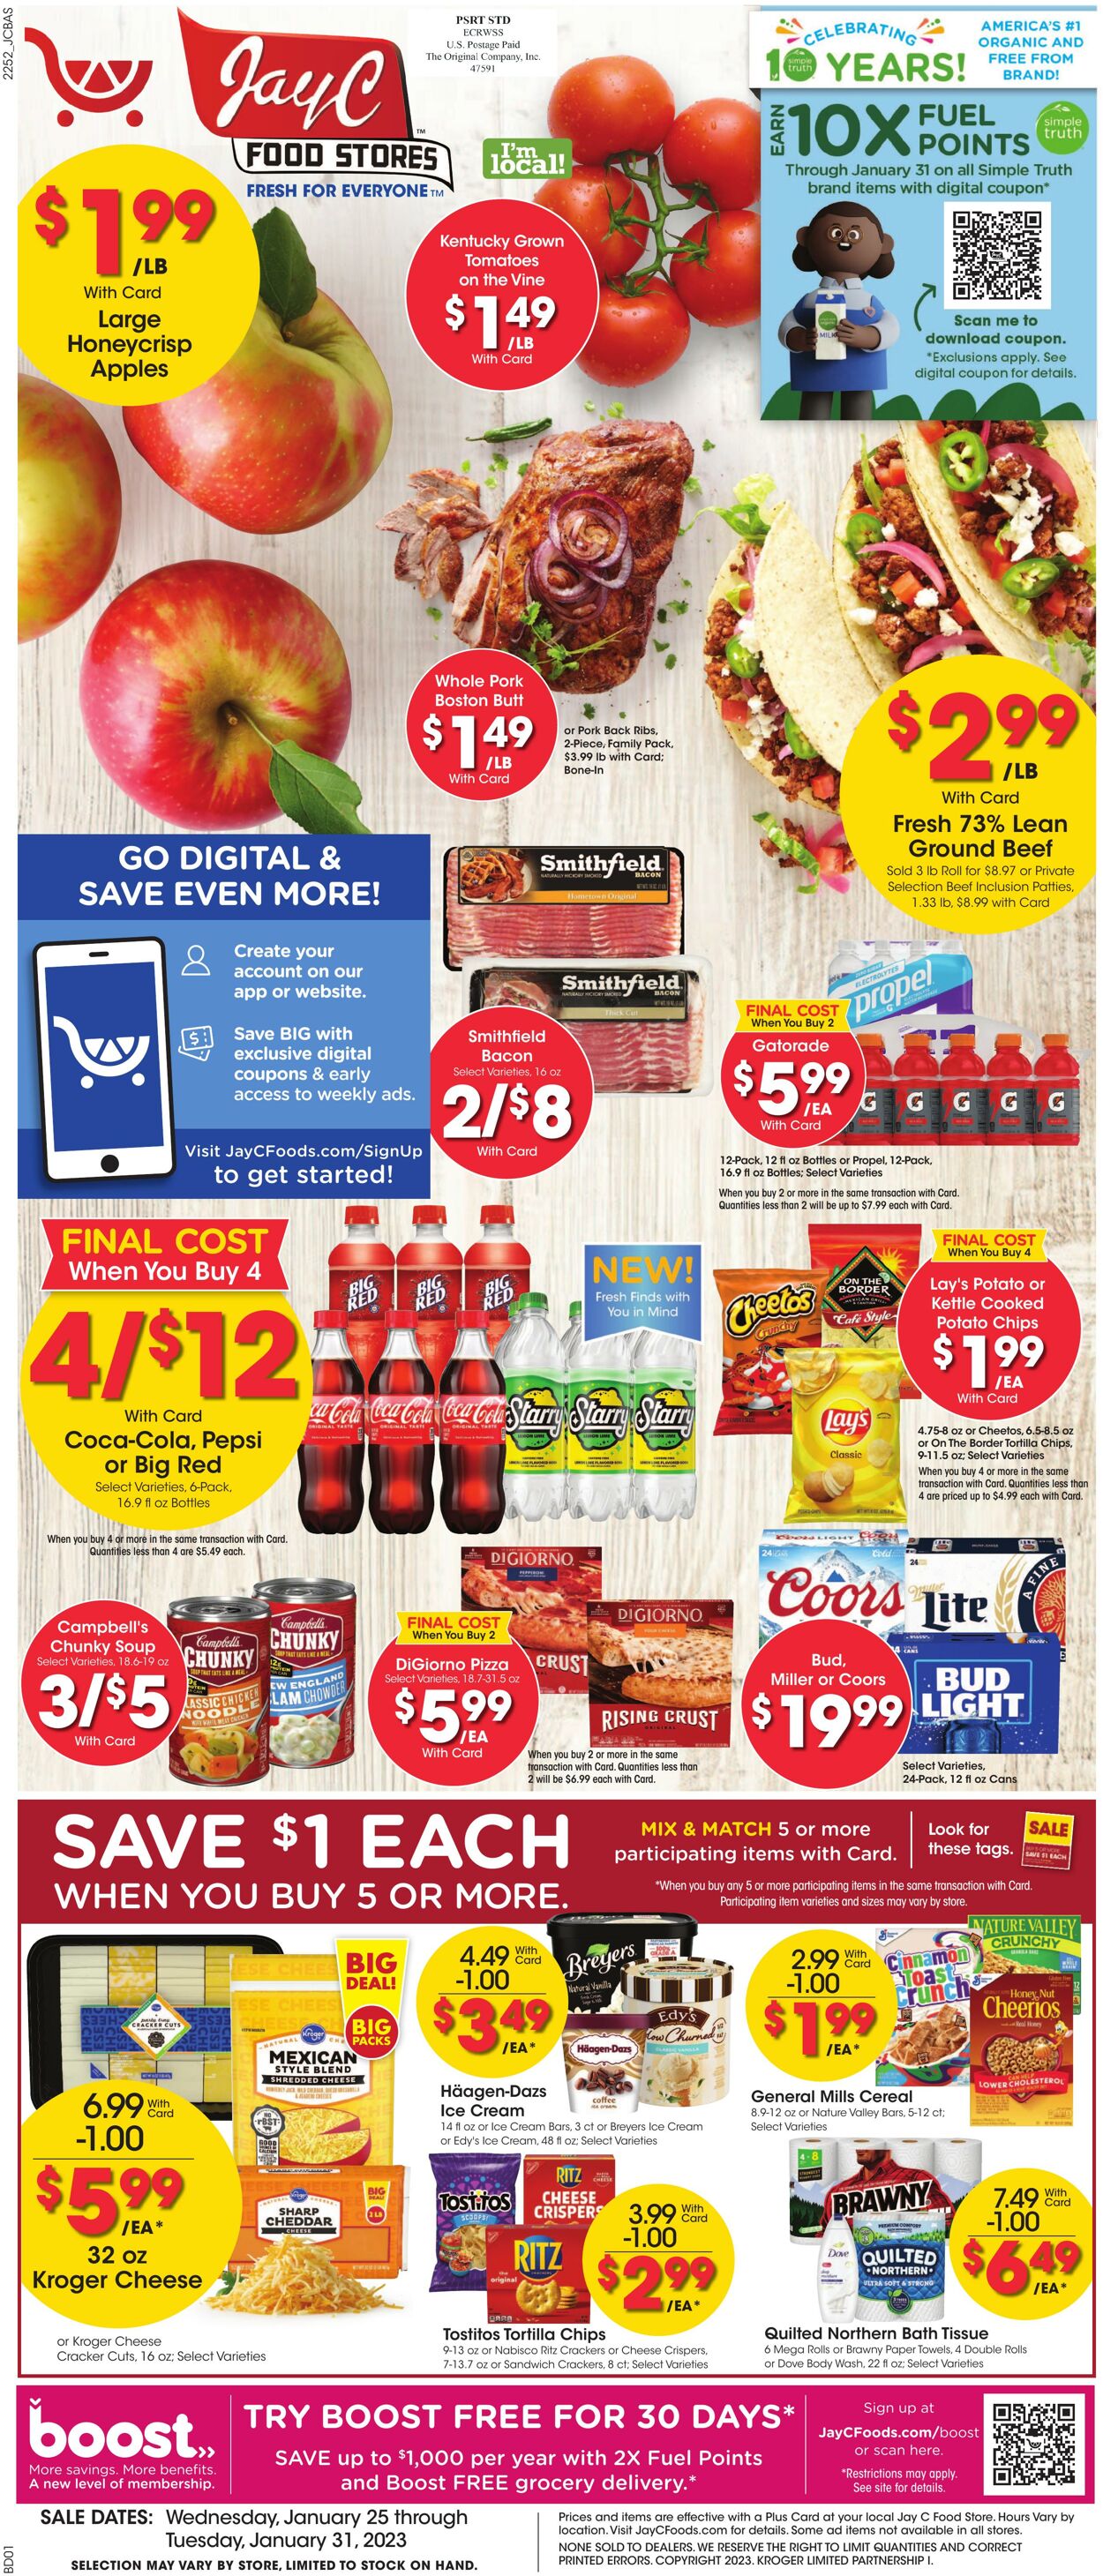 JayC Food Stores Promotional weekly ads